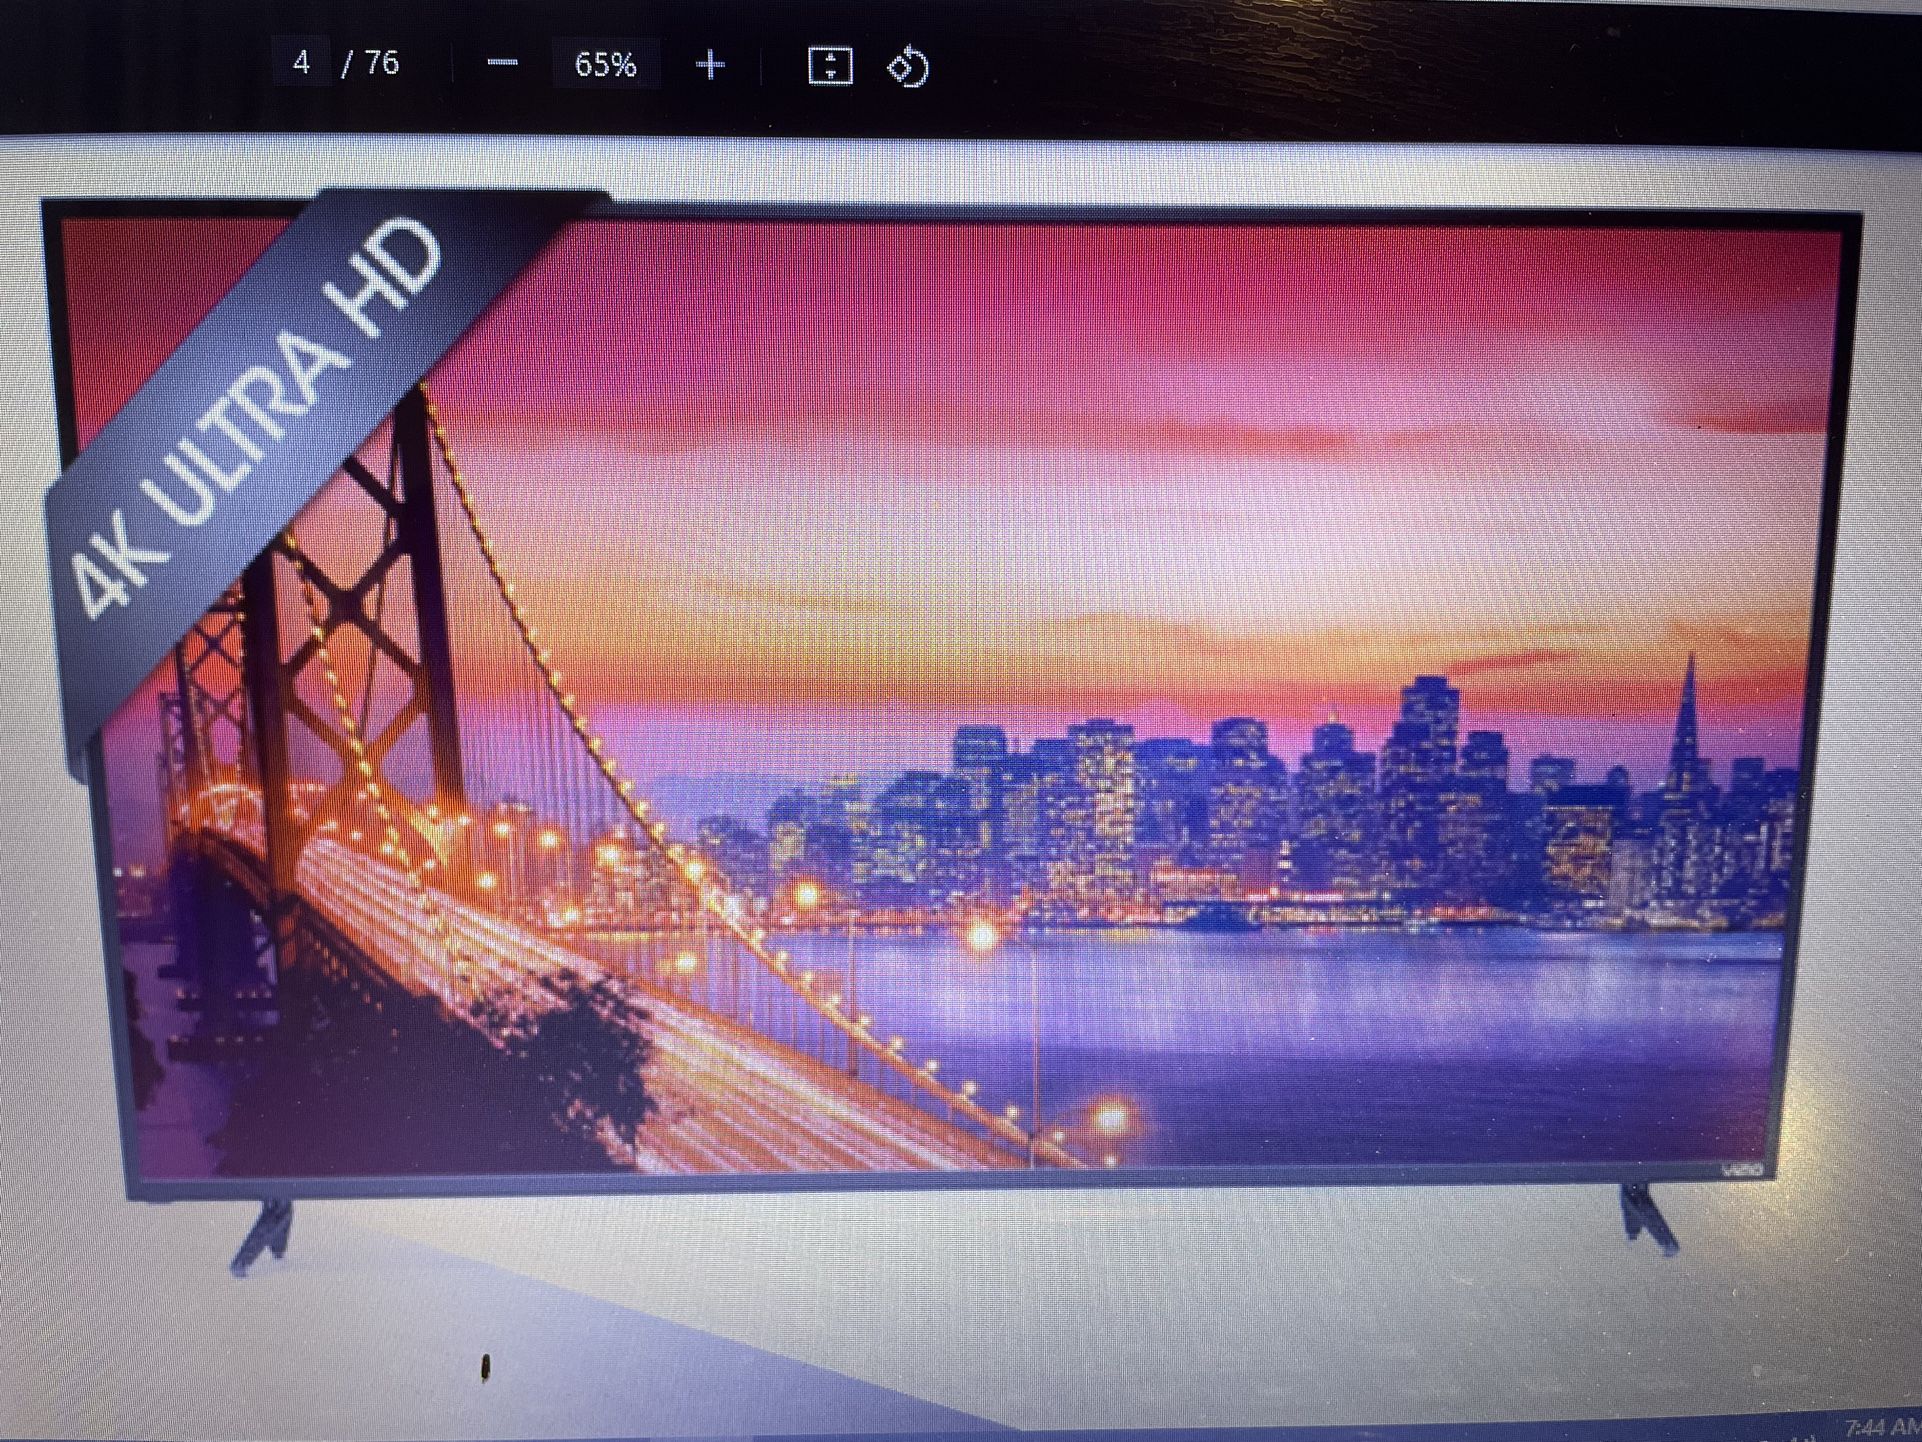 Visio Smart TV 65” 4K  E65u-D3 Excellent Condition Like New Price To Sale 